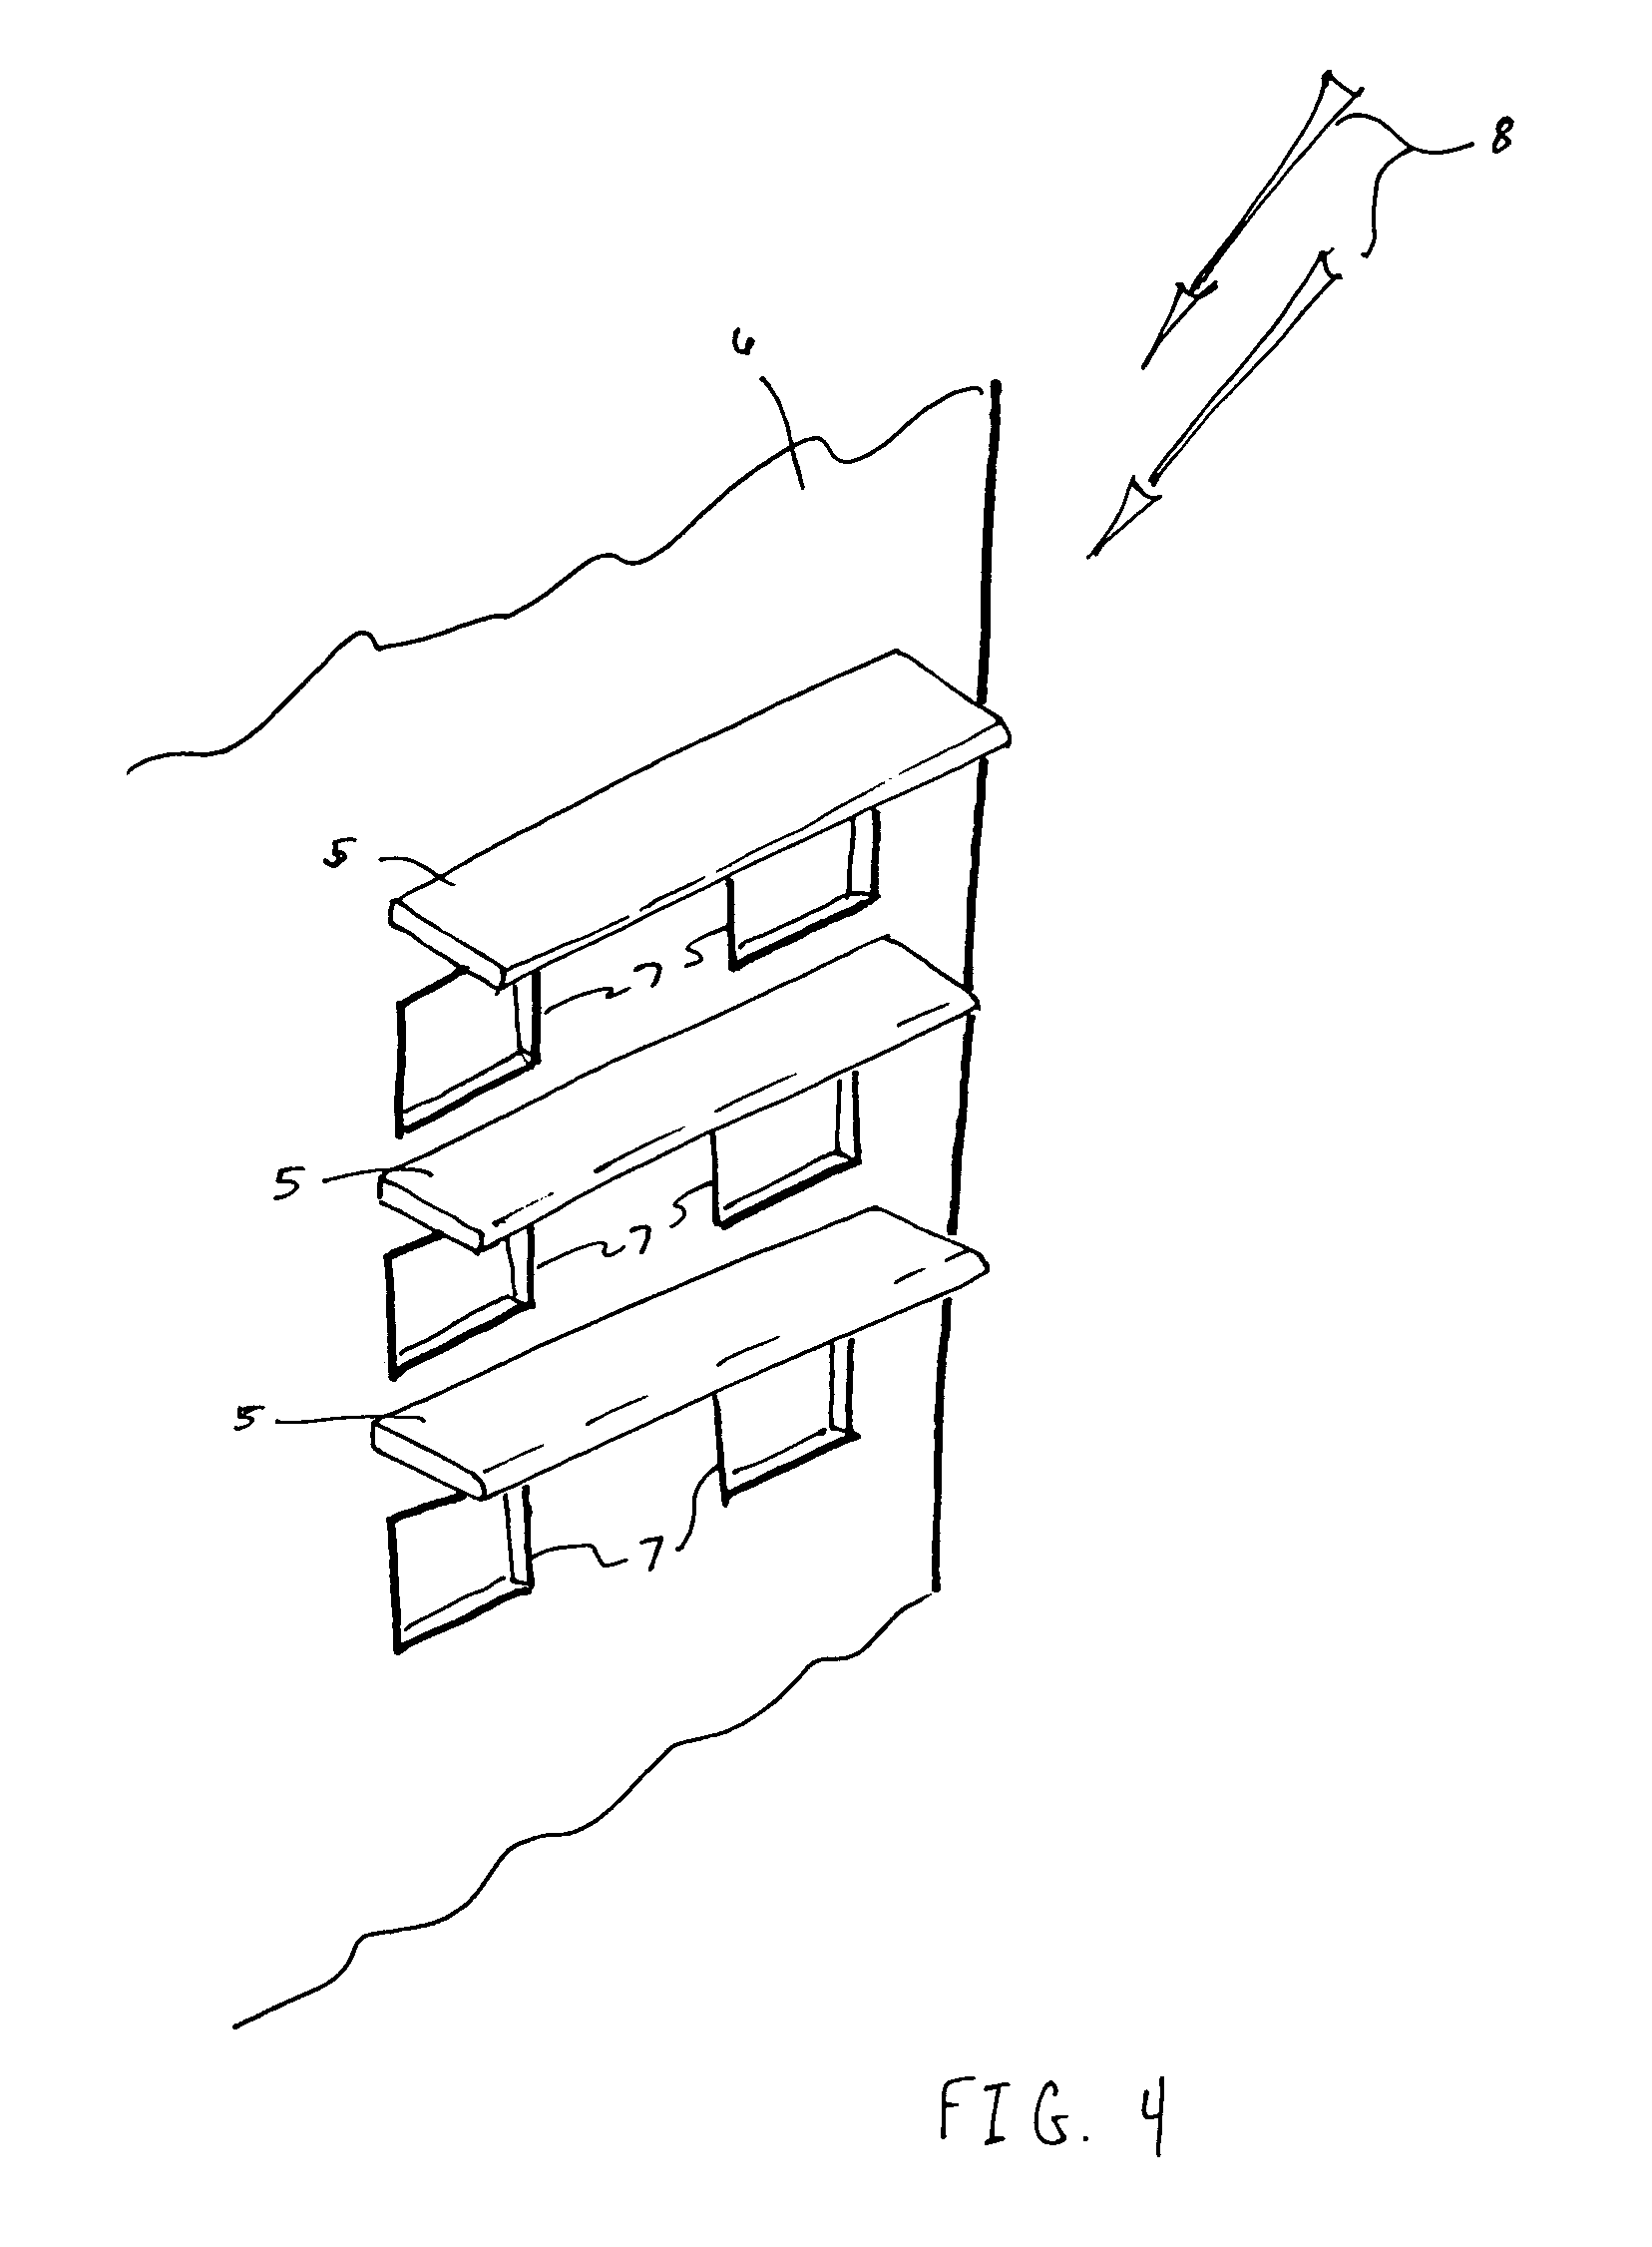 Anti-roosting device